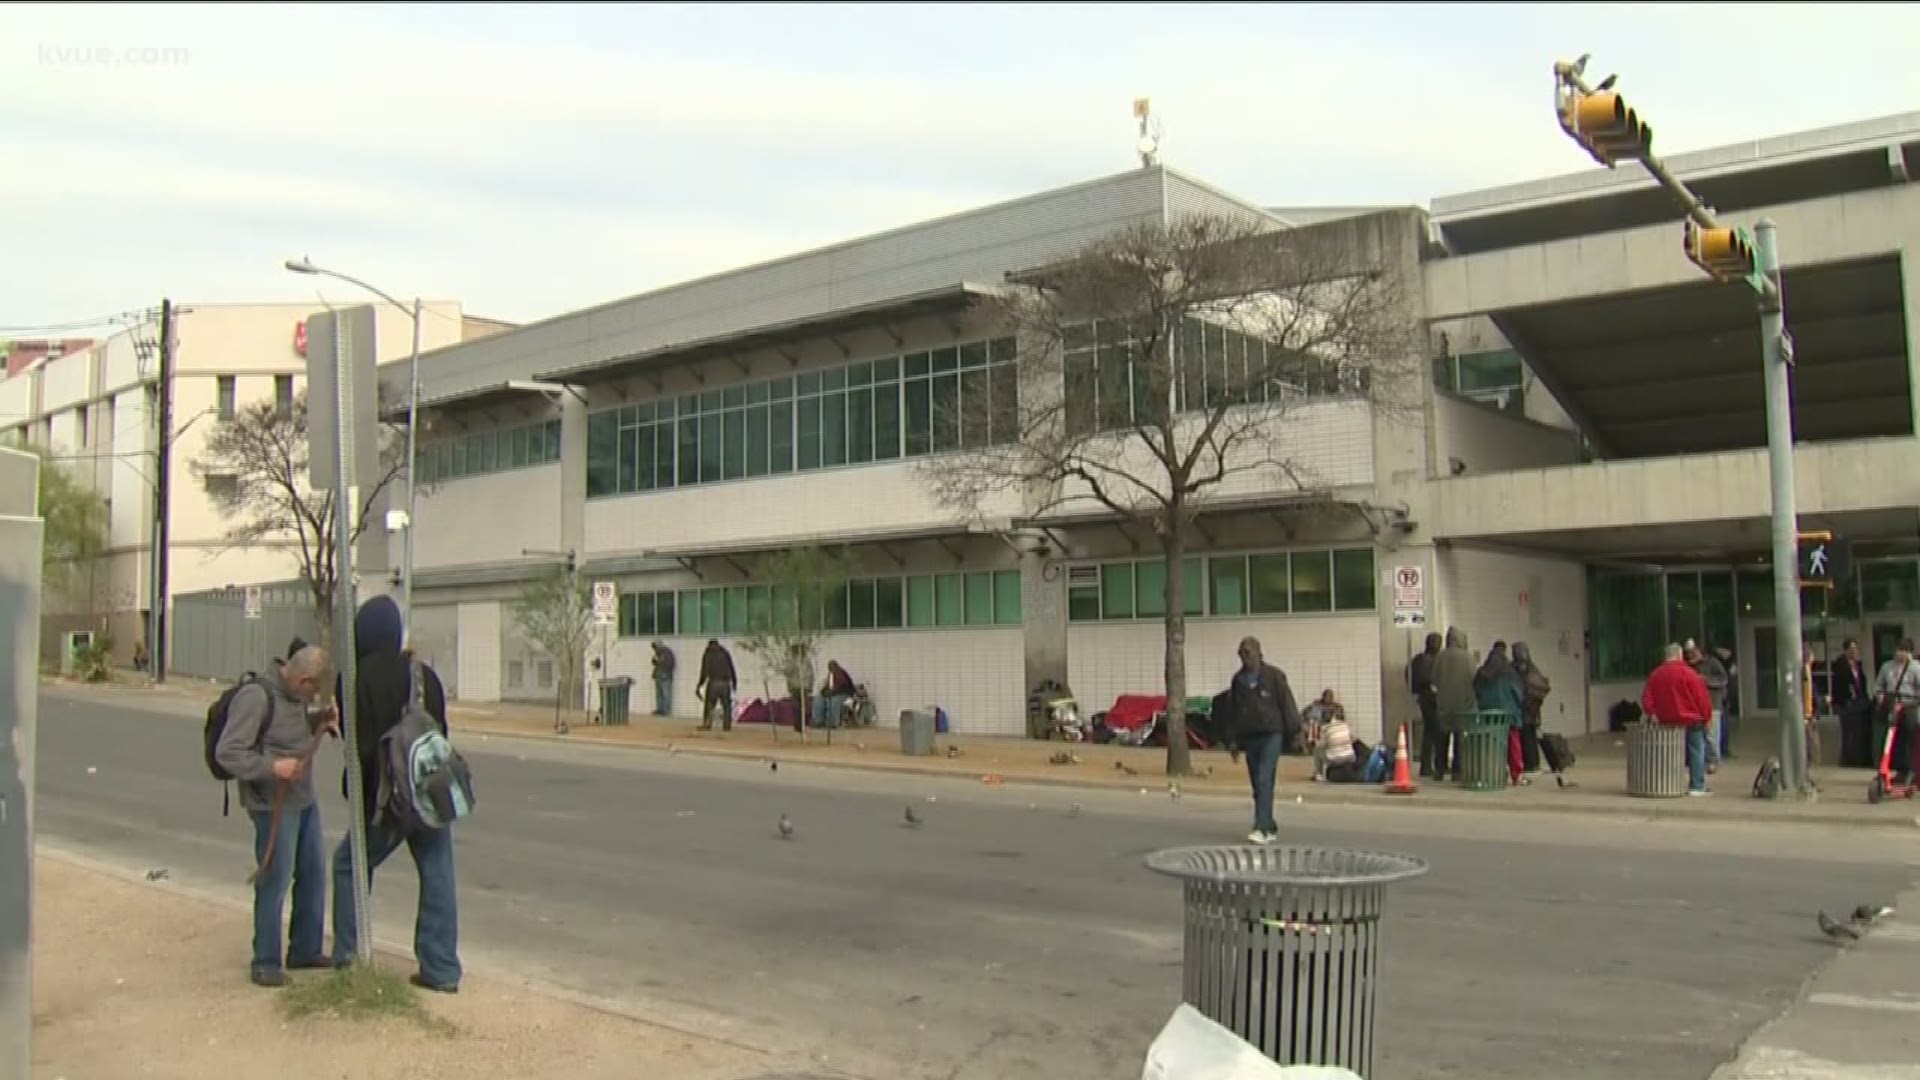 The council heard plans and ideas for how to help Austin's homeless. One aspect discussed was a need for more storage.